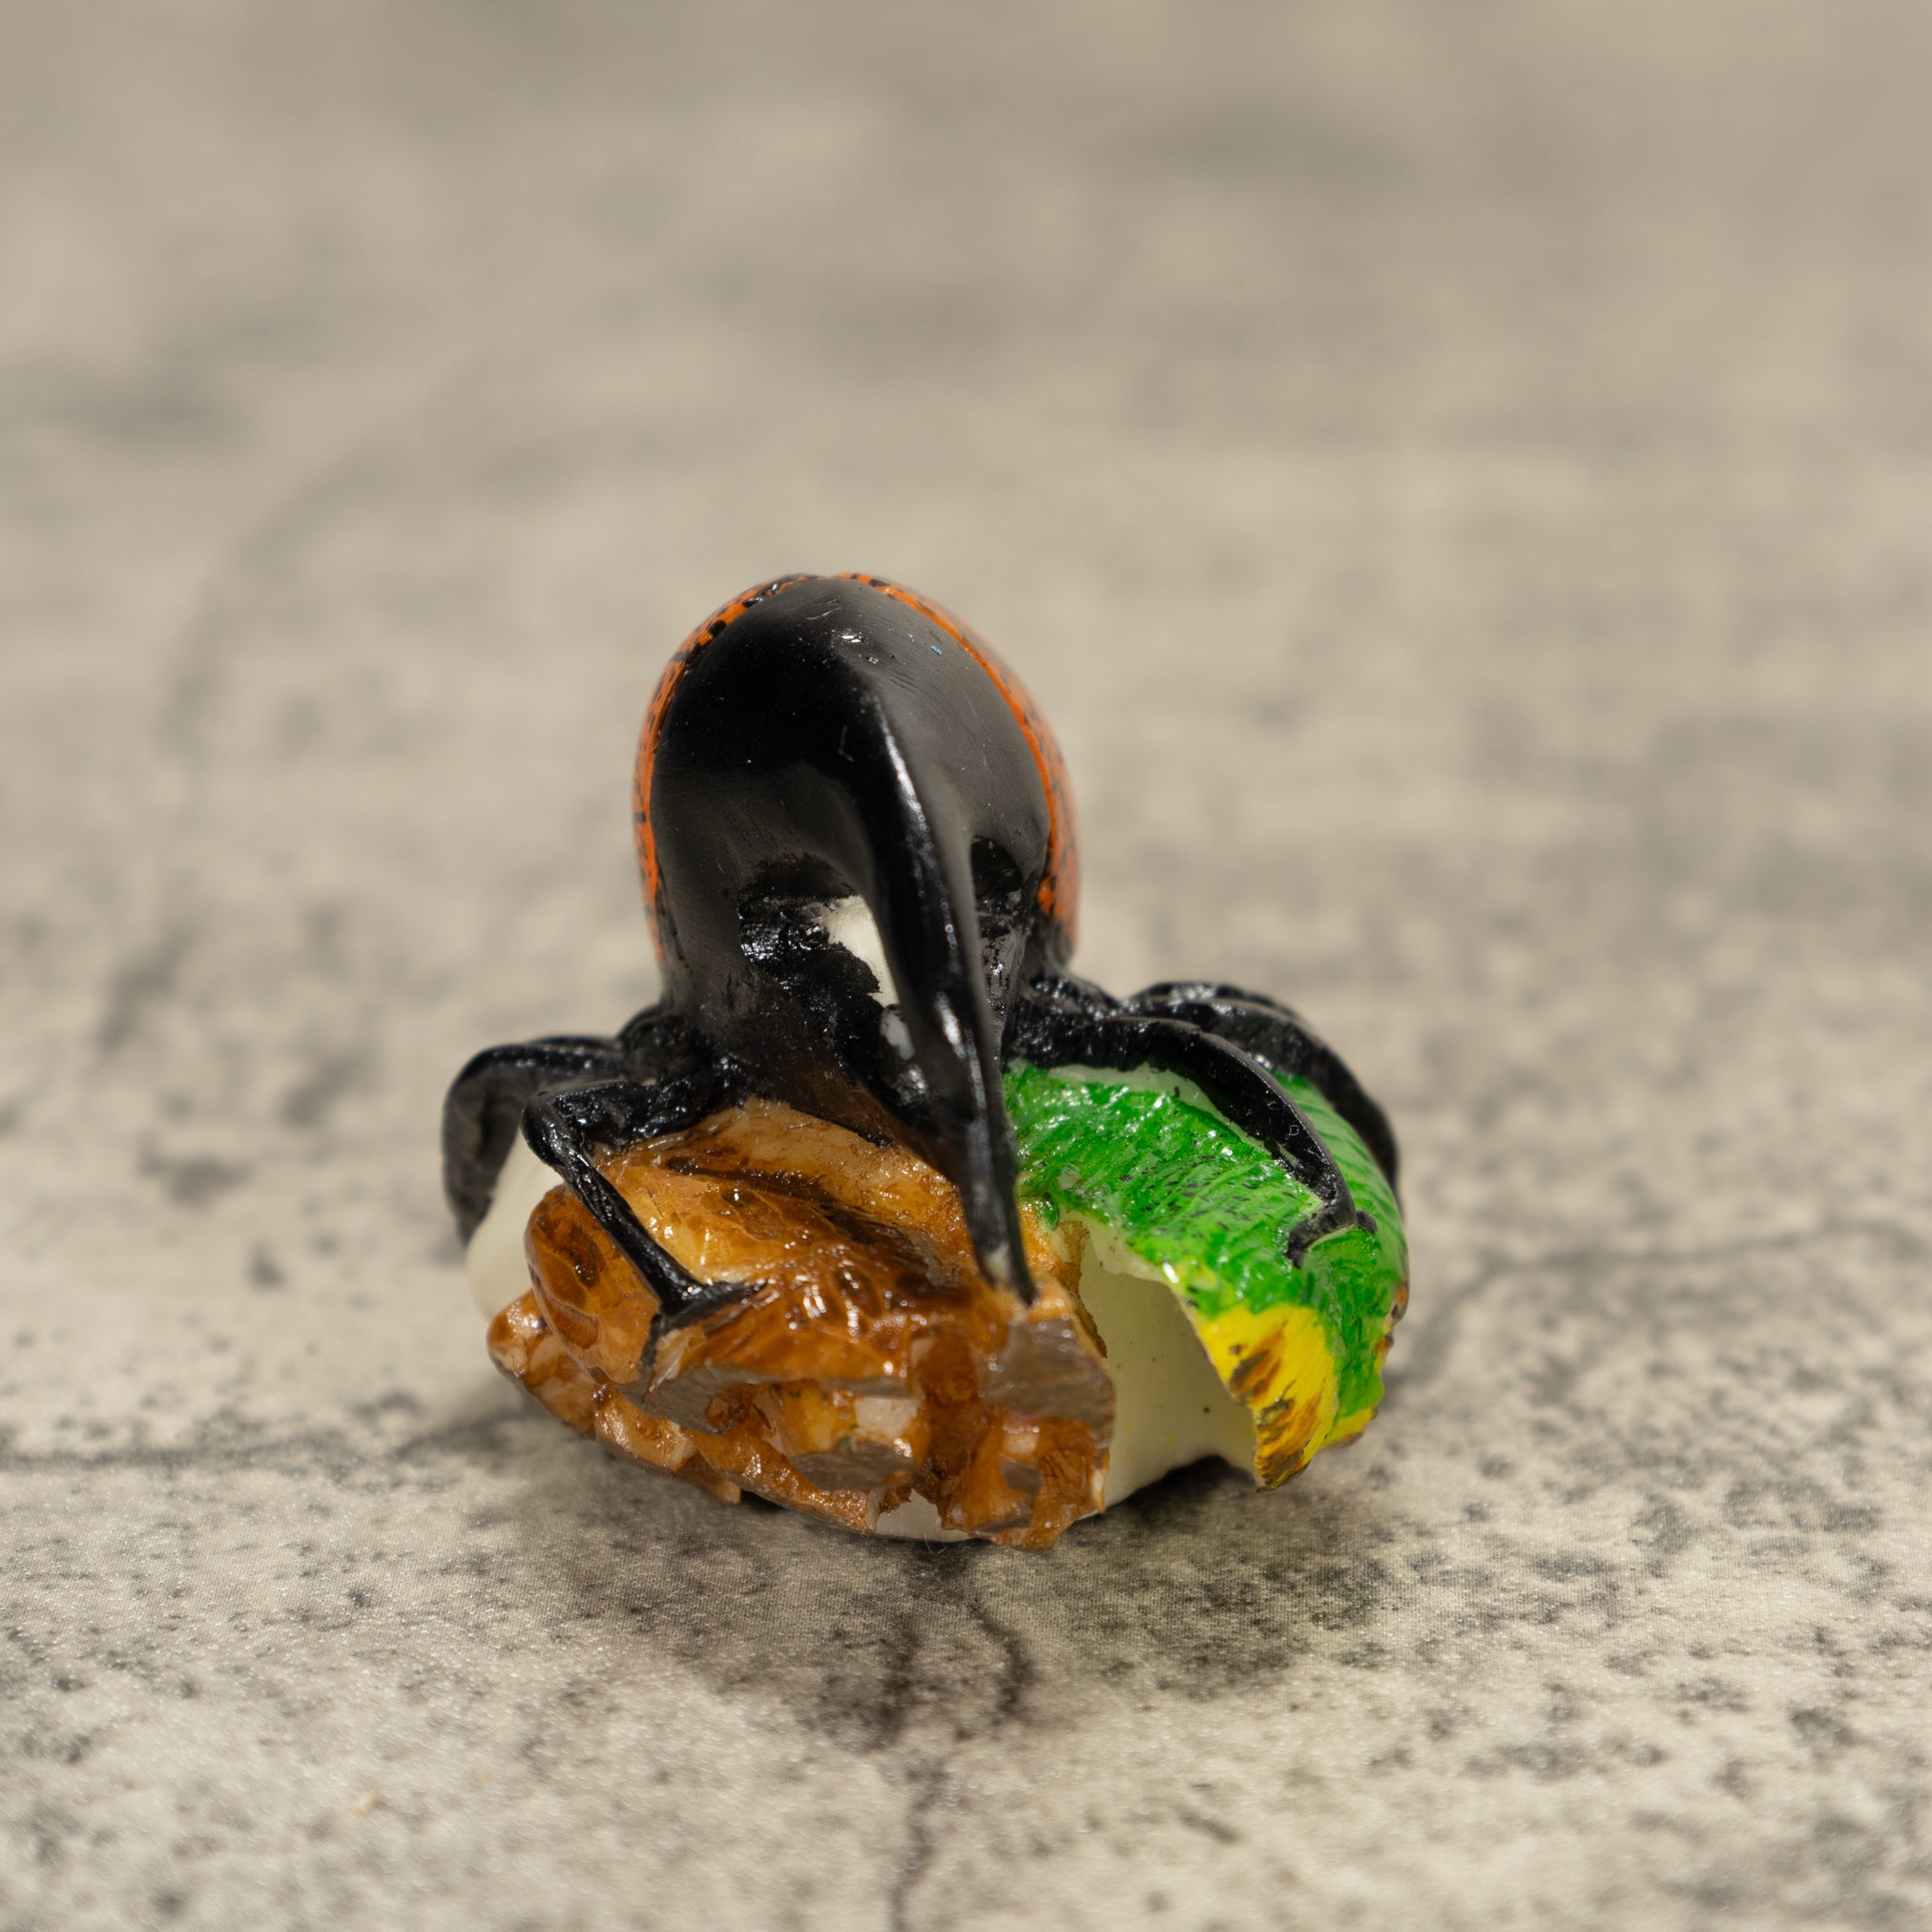 Orange And Black Bug Insect Tagua Nut Carving